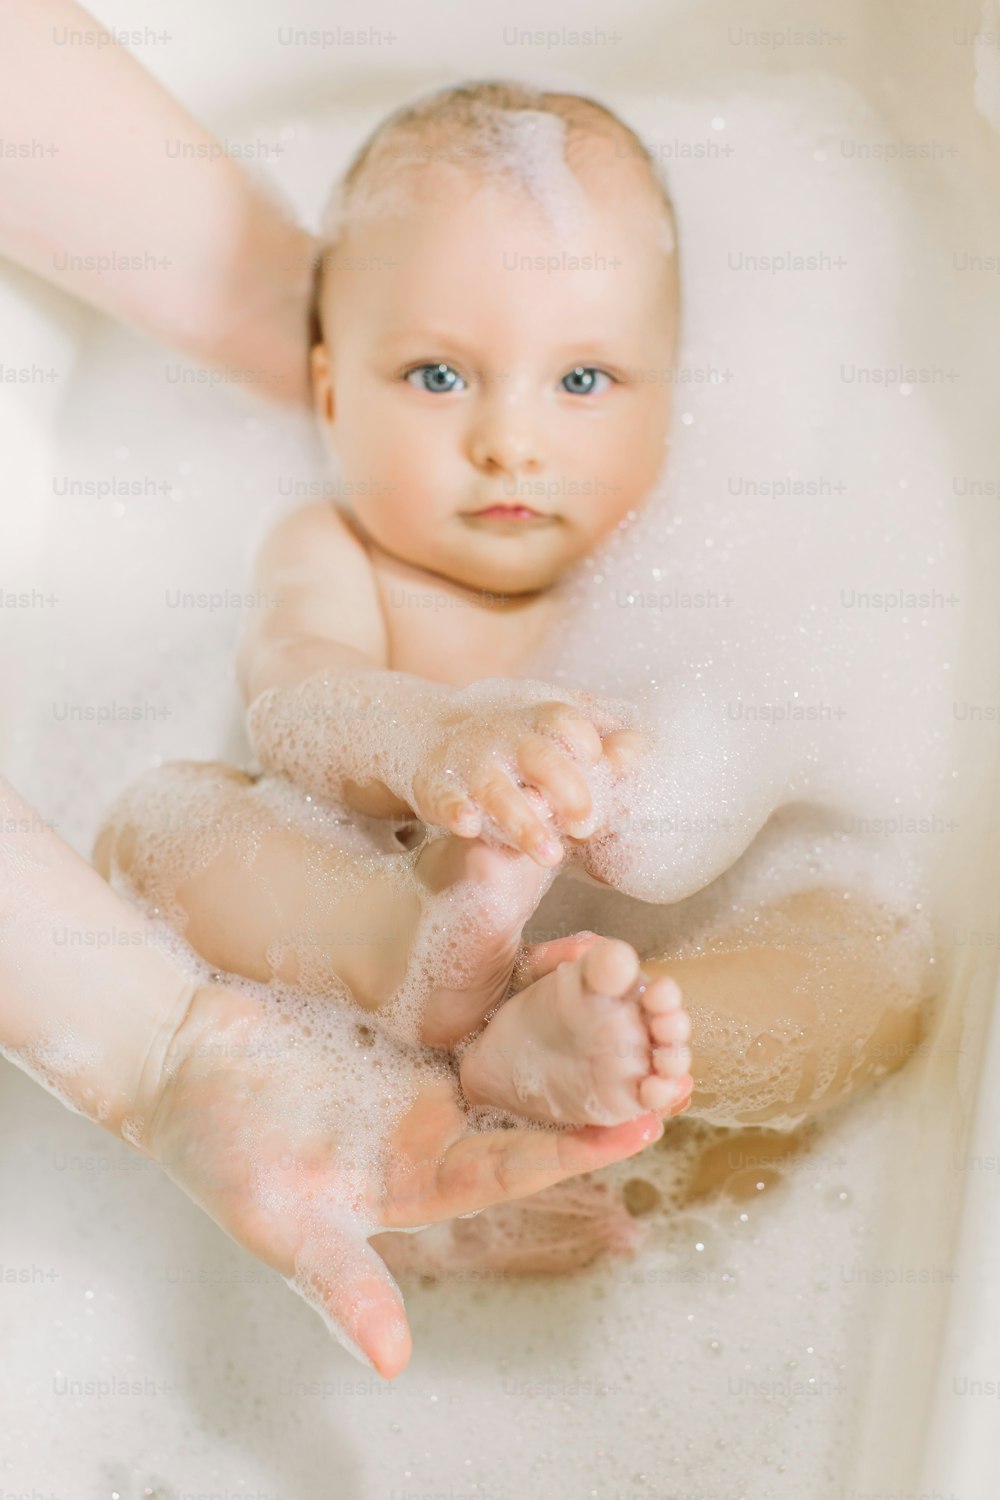 Happy laughing baby taking a bath playing with foam bubbles. Little child in a bathtub. Infant washing and bathing. Hygiene and care for young children. Newborn baby bathing